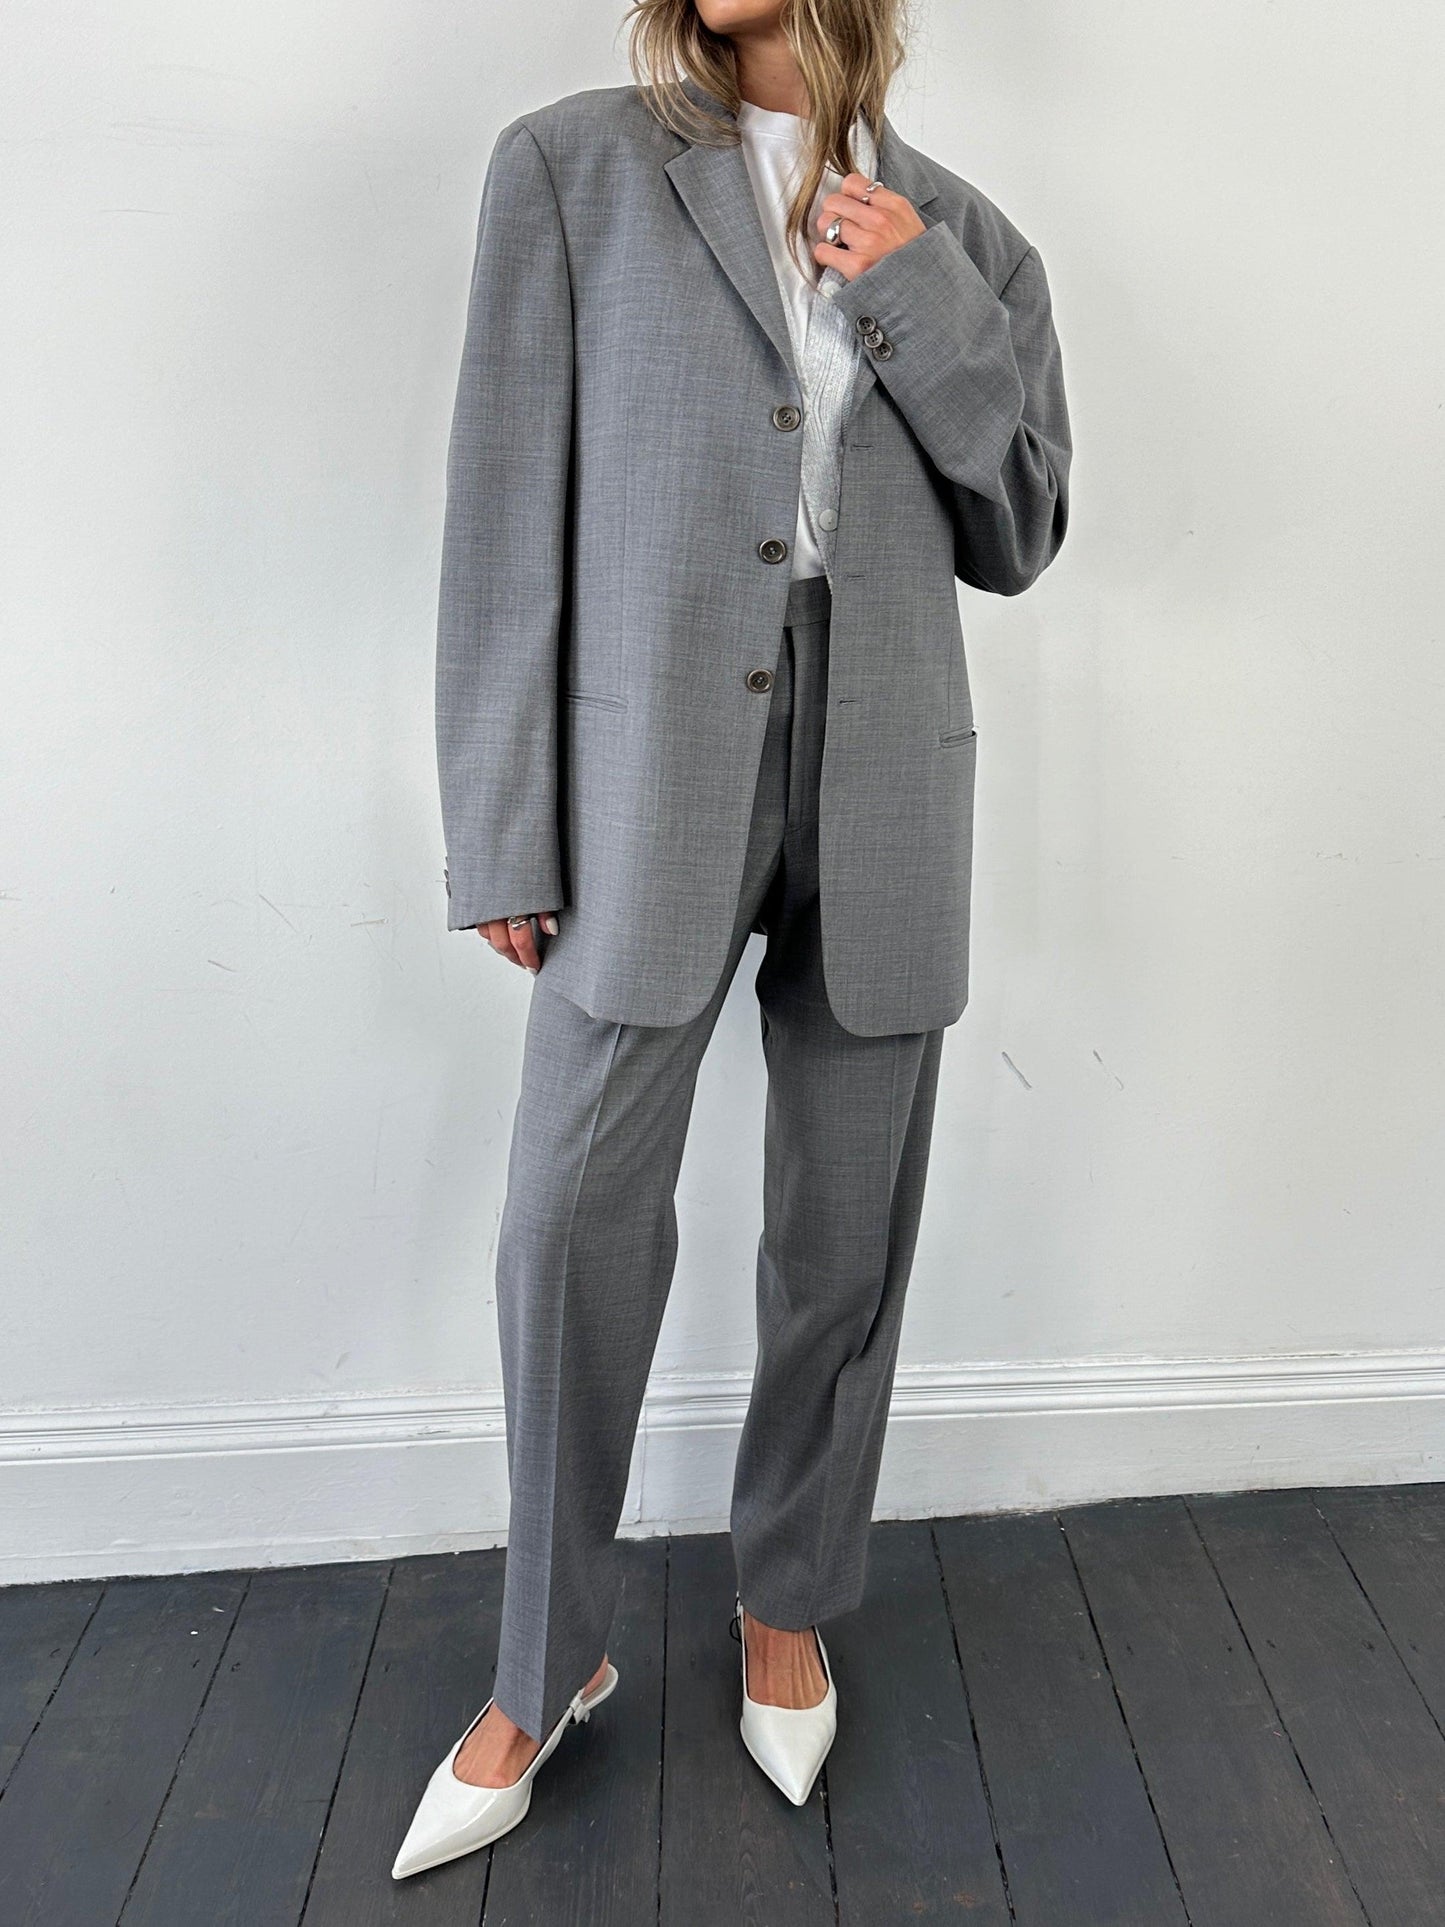 Armani Relaxed Virgin Wool Suit - 40R/W32 - Known Source